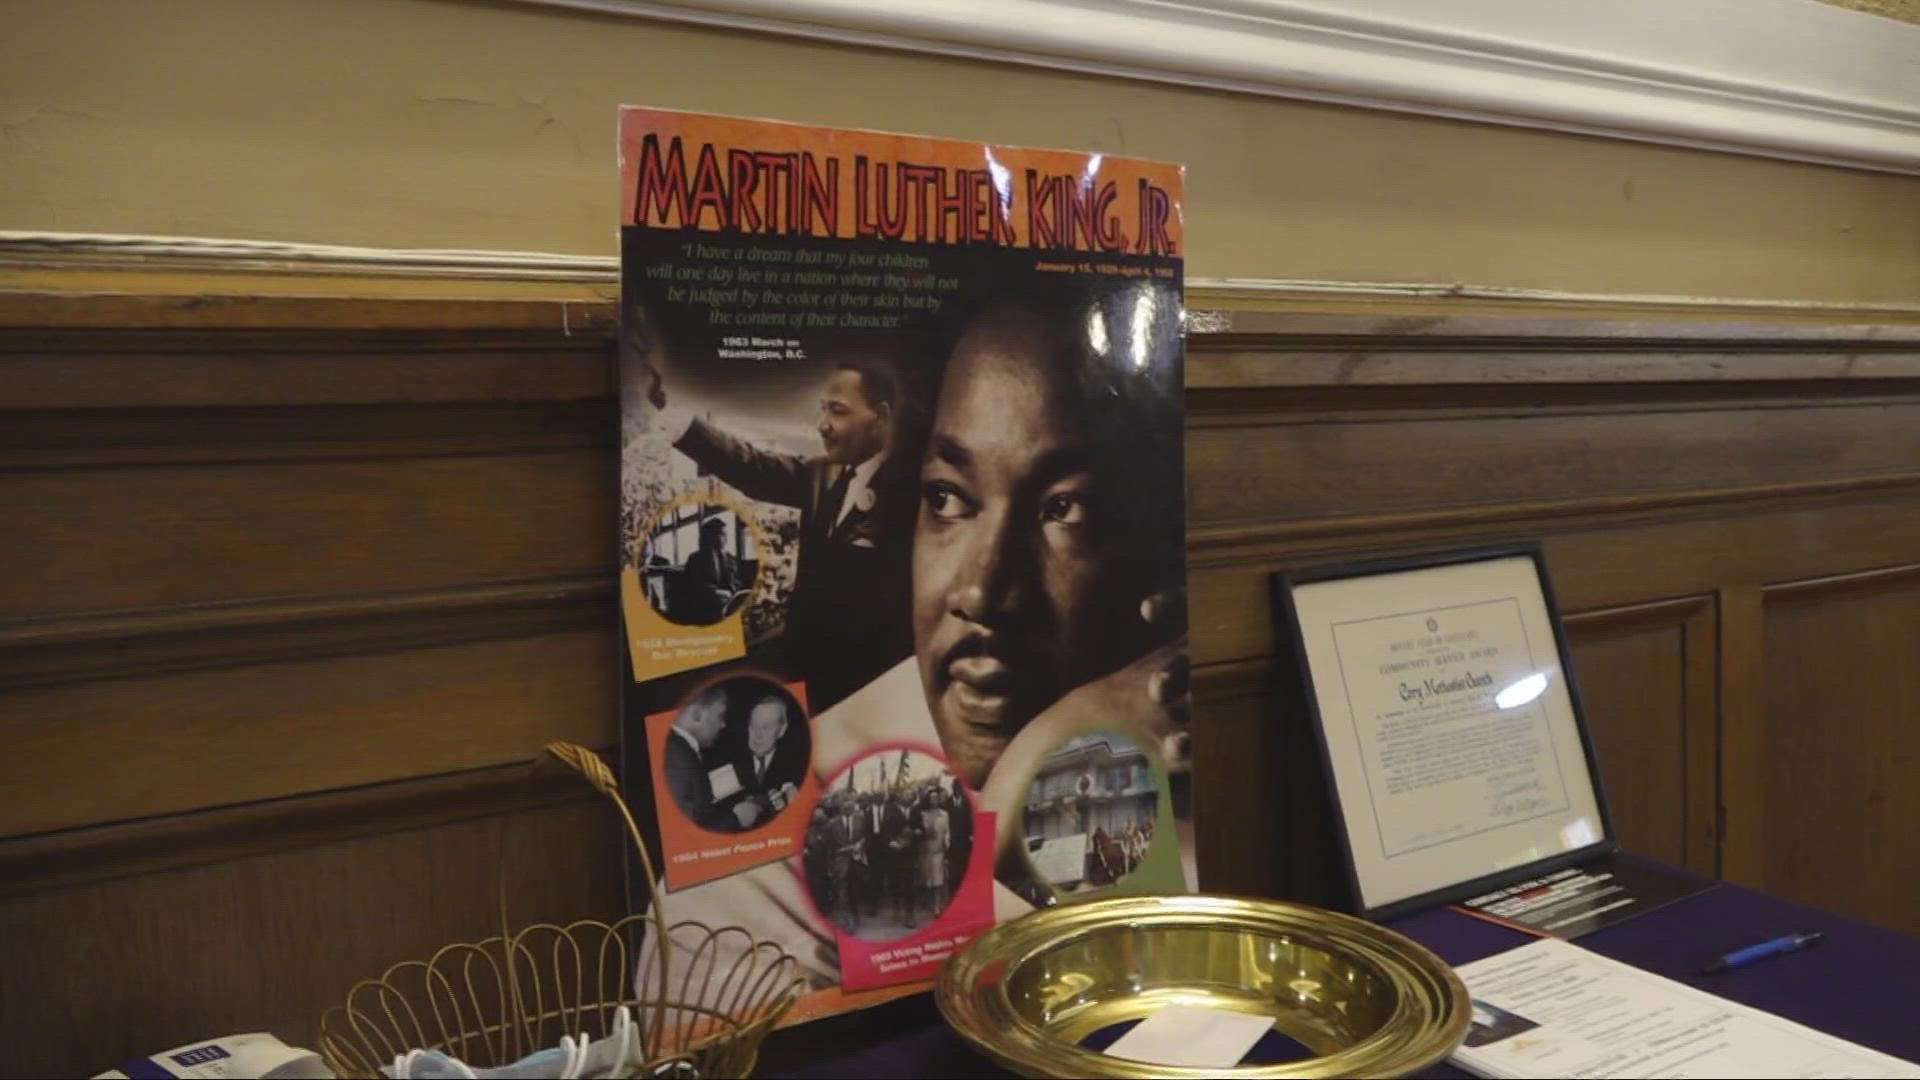 A look into the Commemoration and Interfaith service held at Cory United Methodist Church in Cleveland that honored Martin Luther King Jr.